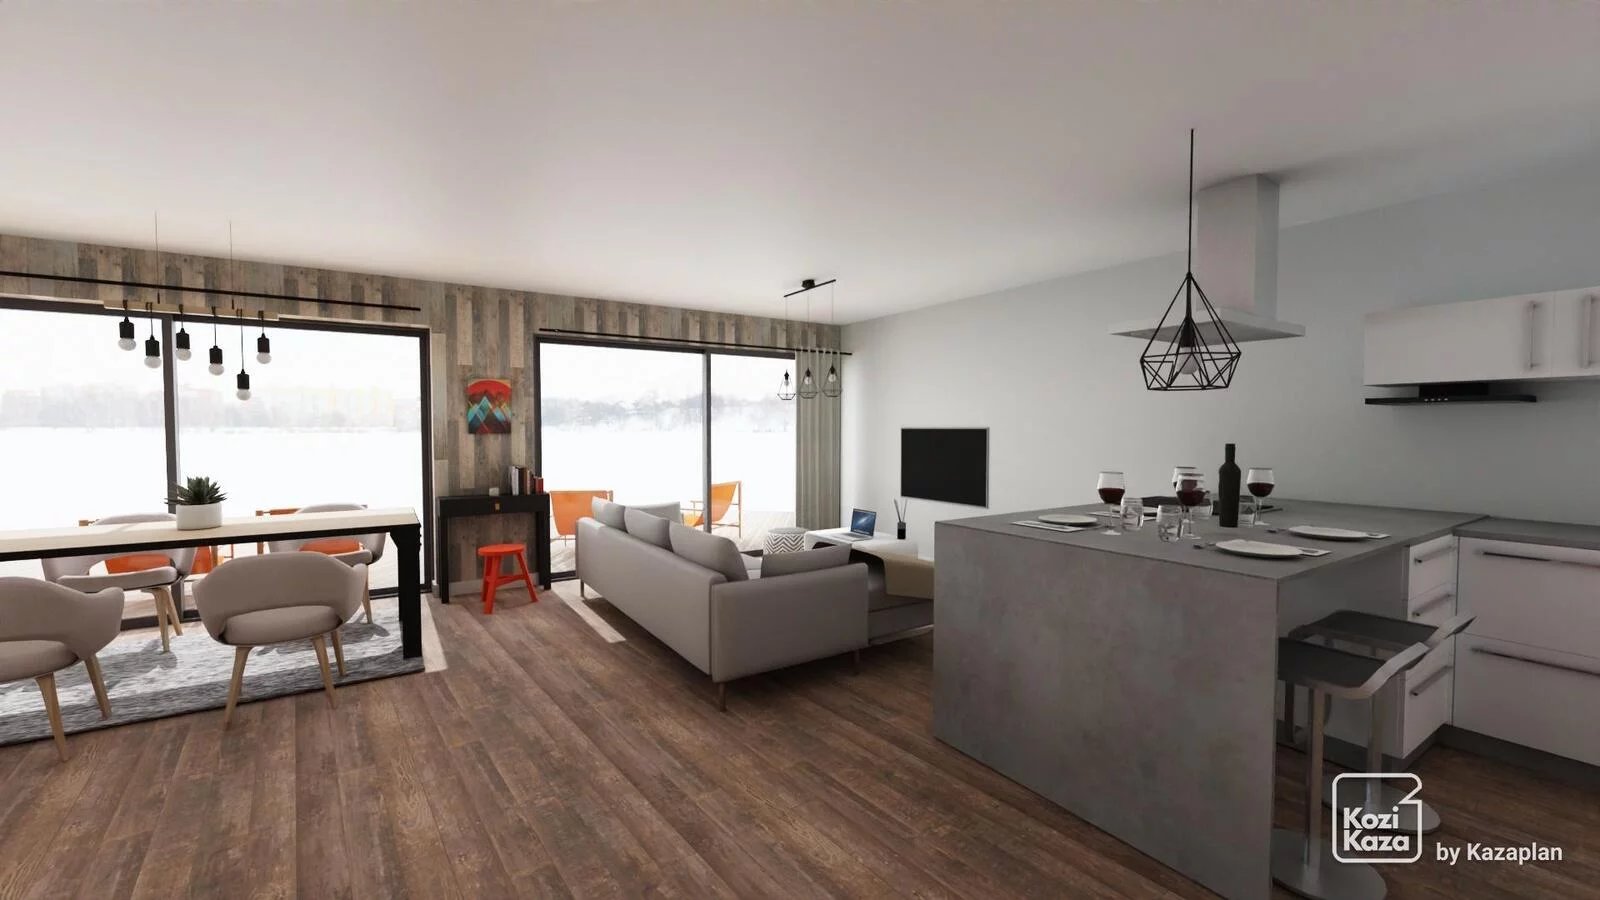 PROJECT TO CREATE AN APARTMENT IN A RENOVATED RESIDENCE IN THE HEART OF VAL THORENS